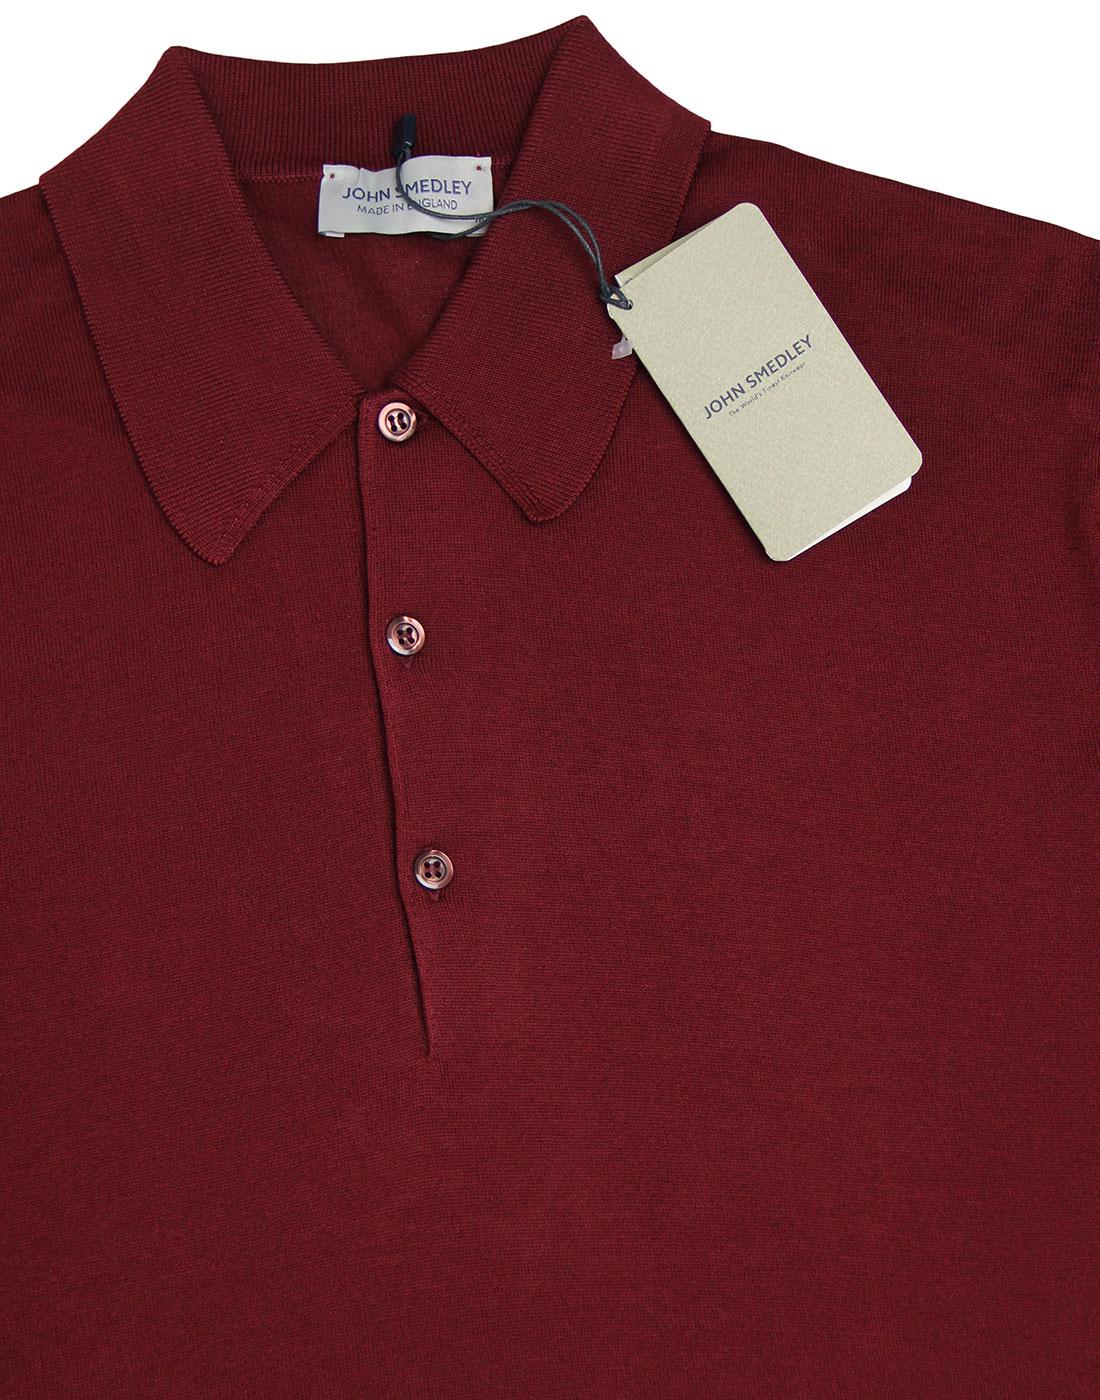 JOHN SMEDLEY Isis Retro 60s Mod Knitted Polo in Burgundy